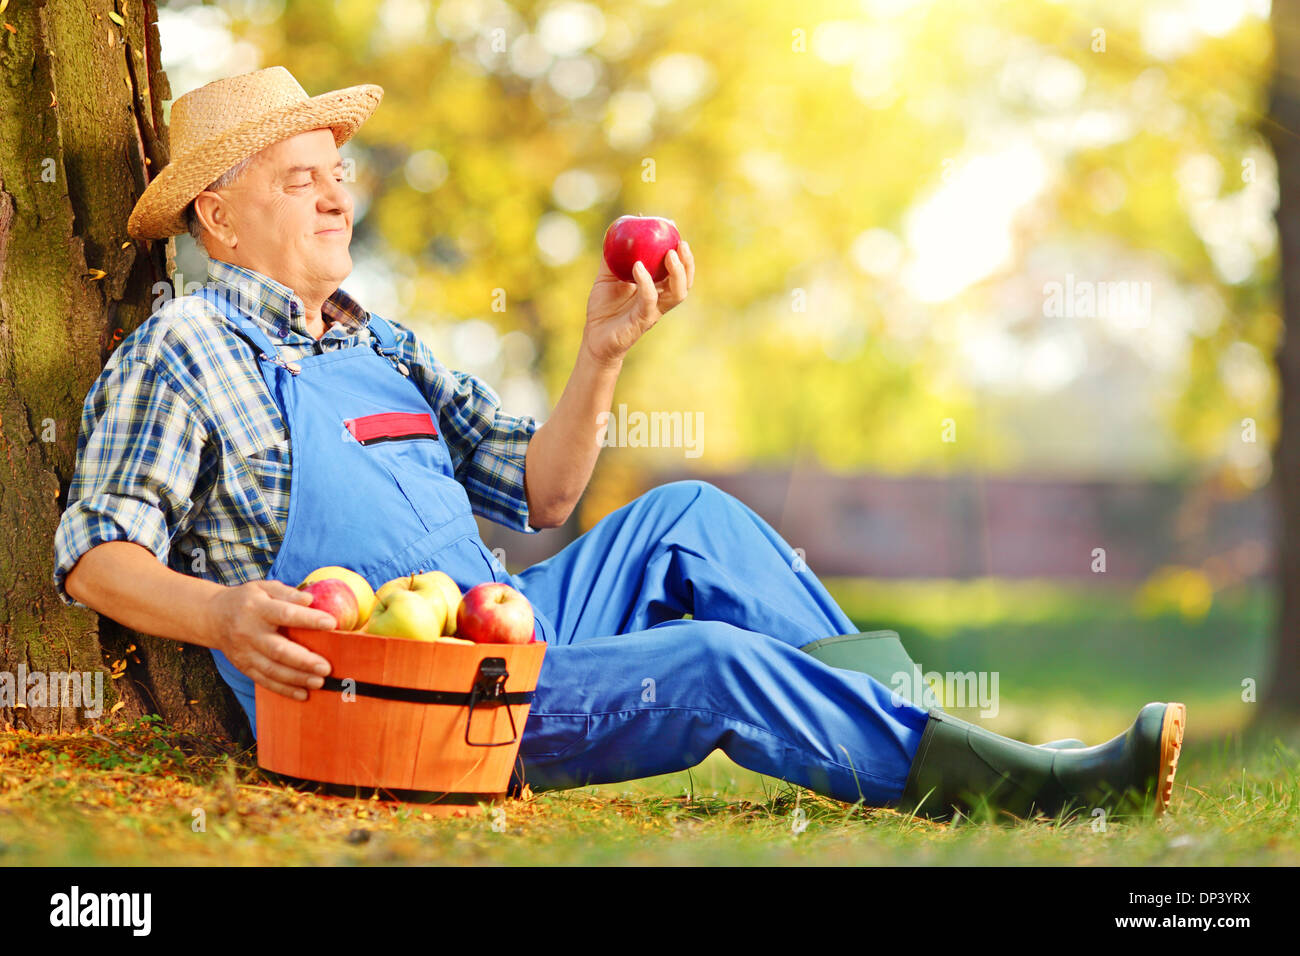 Agricultural worker in overalls with basket of harvested apples sitting in orchard, and looking at apple Stock Photo